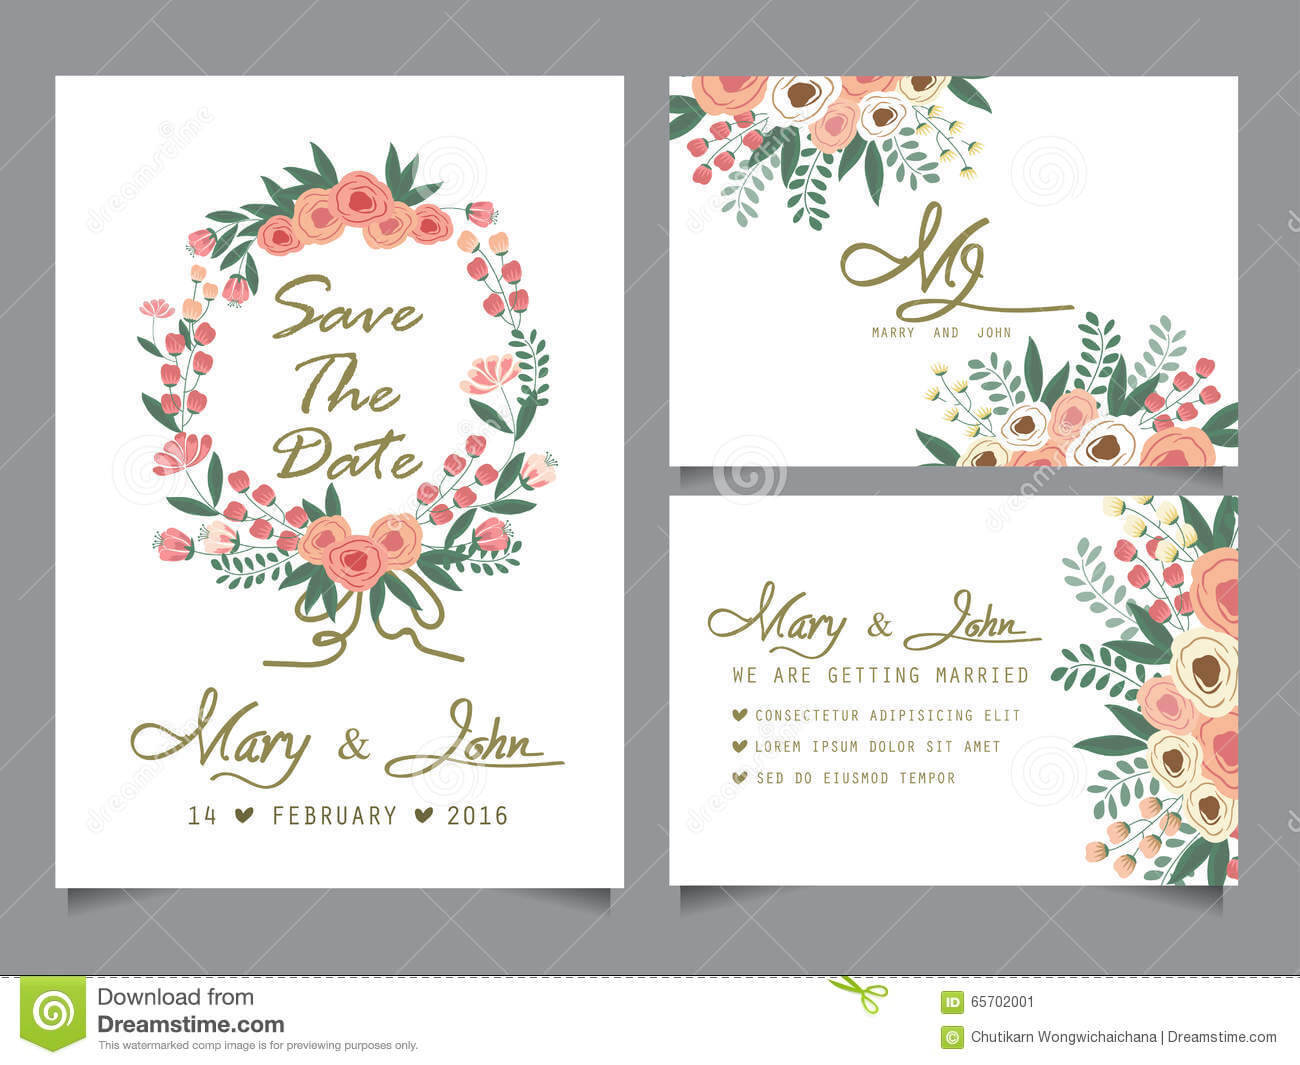 25 Awesome Template Design For Invitation Card For Sample Wedding Invitation Cards Templates